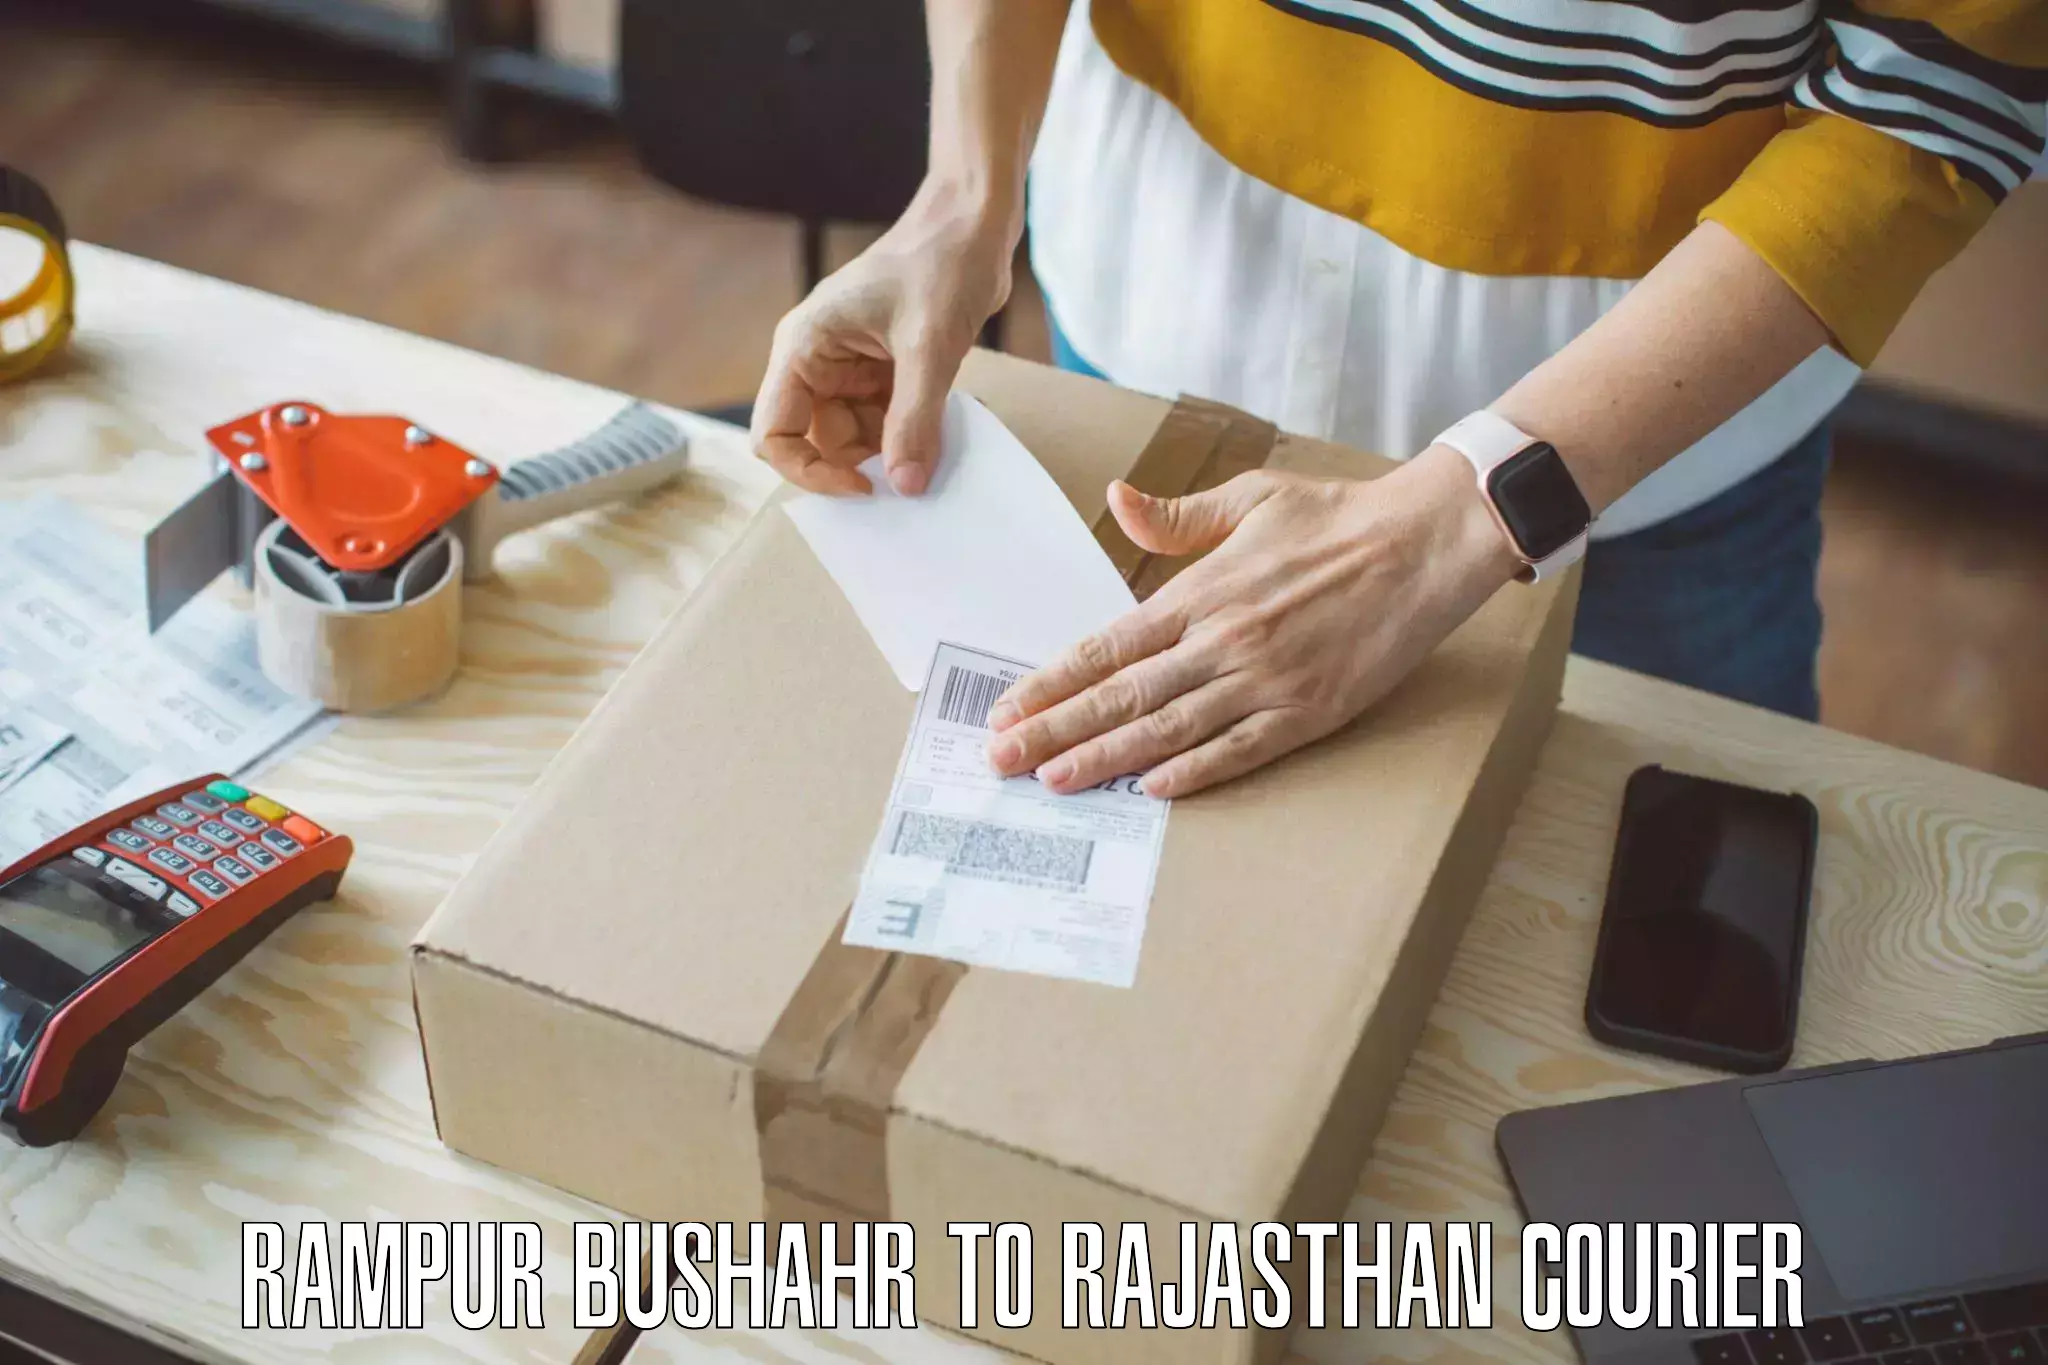 Dependable moving services Rampur Bushahr to Reengus